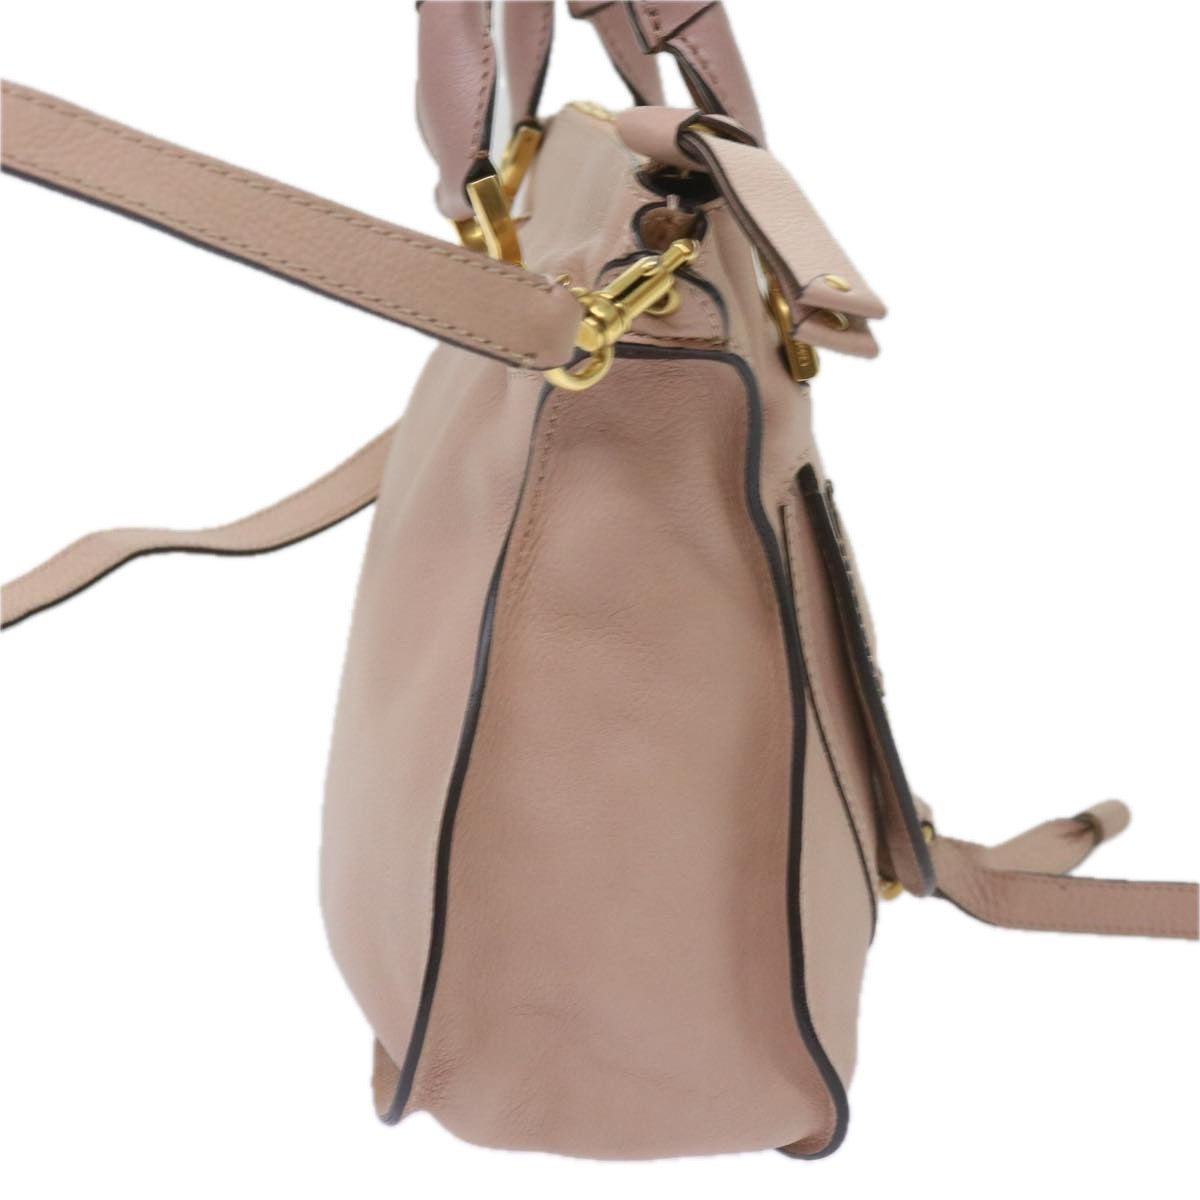 Chloe Mercy Hand Bag Leather 2way Pink Auth yk10730